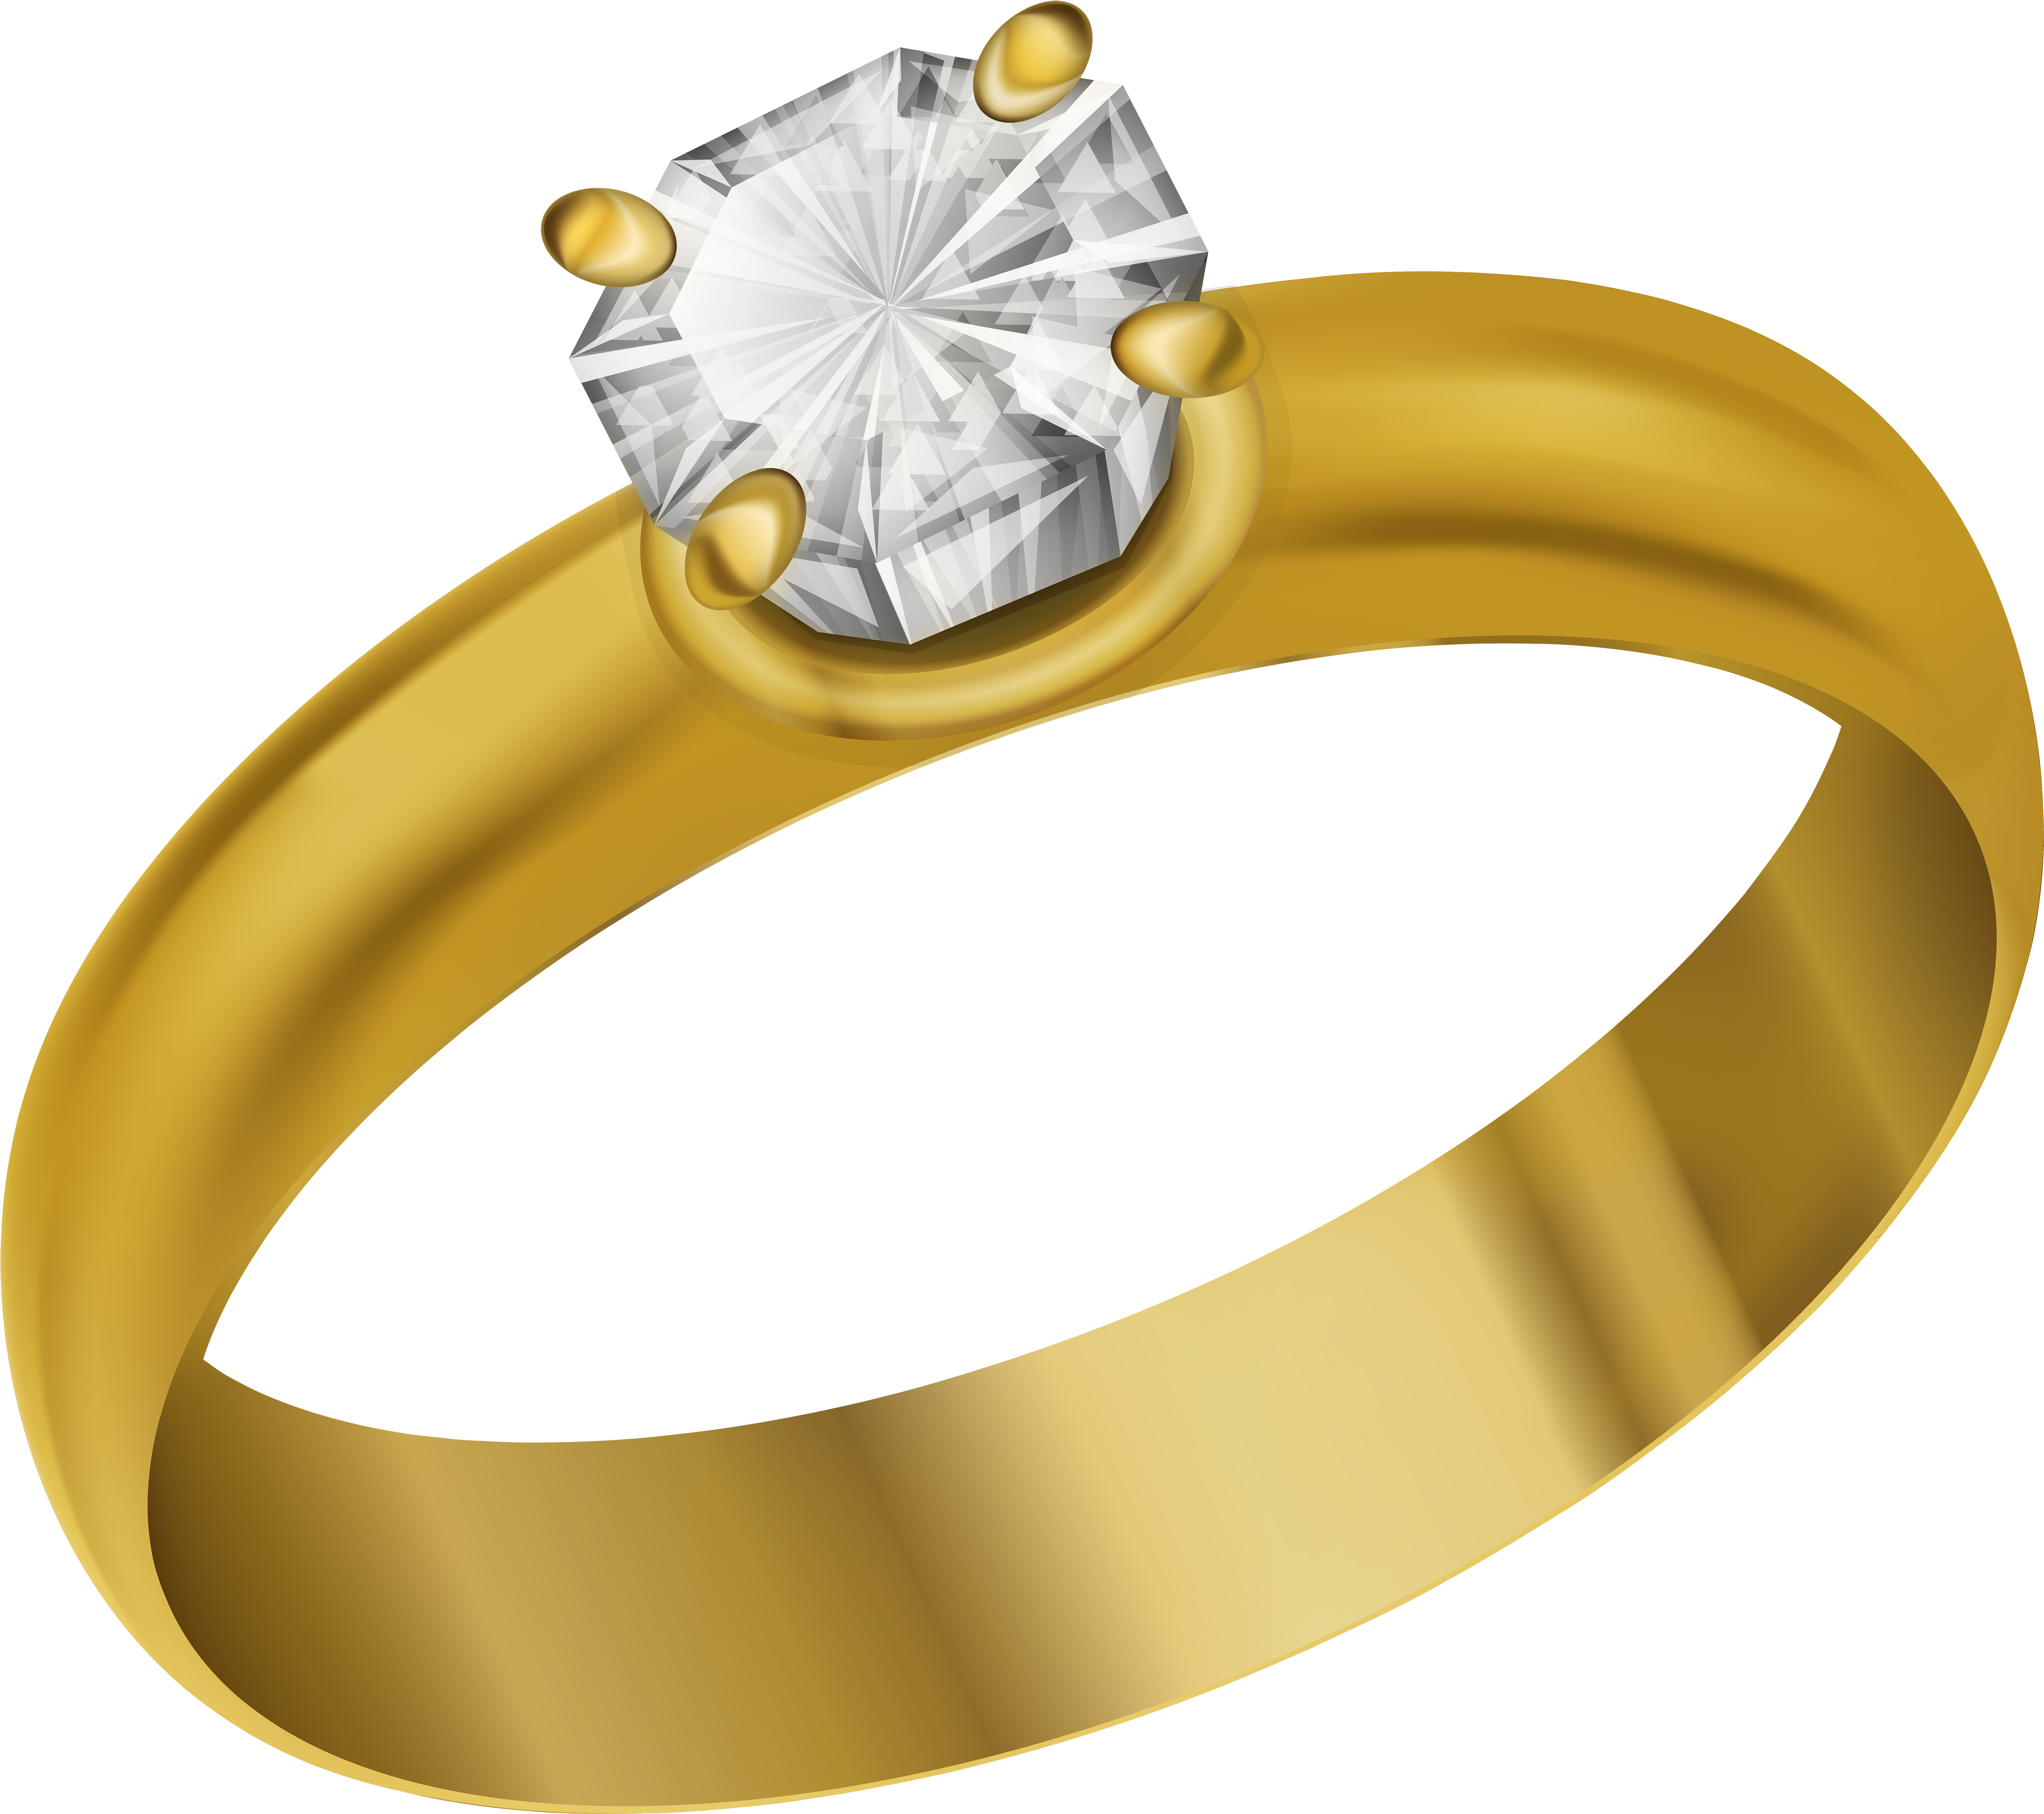 Diamond Ring PNG Background Image